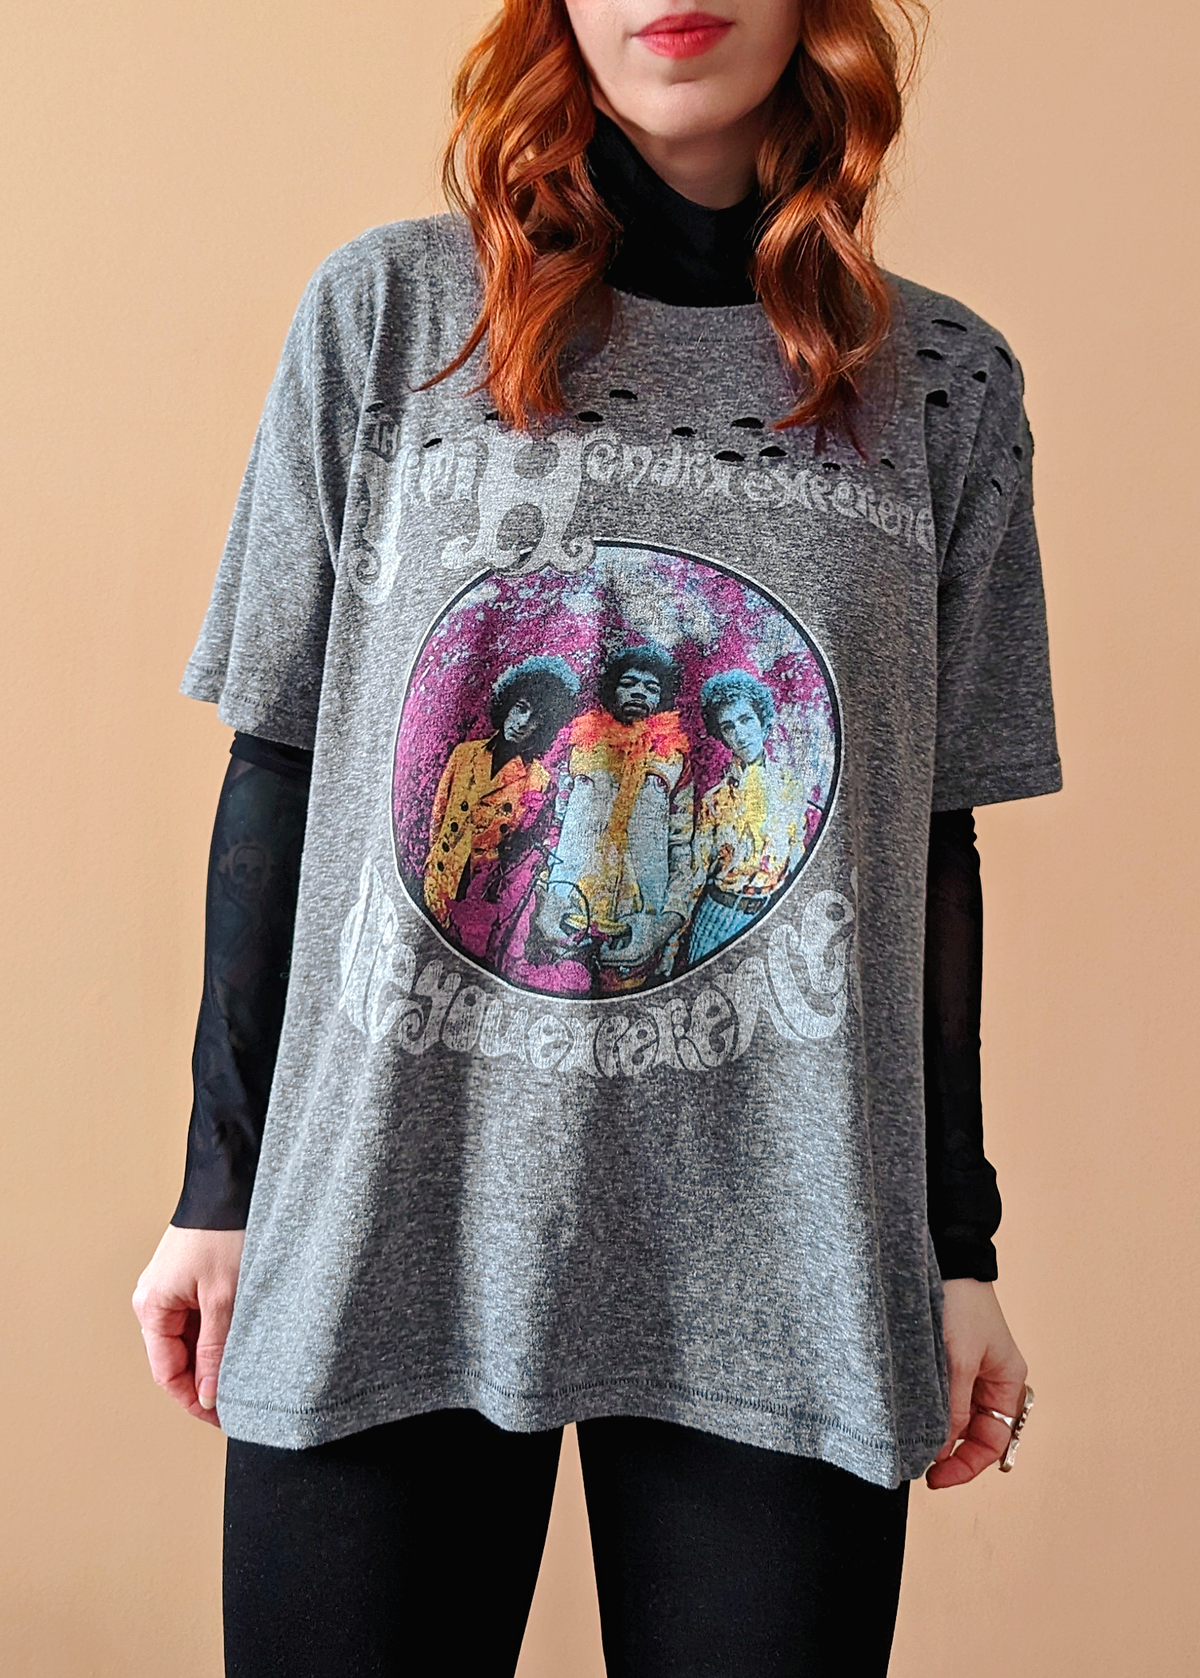 60s inspired Jimi Hendrix Experience Are You Experienced slouchy fit grey tee by daydreamer la, officially licensed and made in california, destroyed details